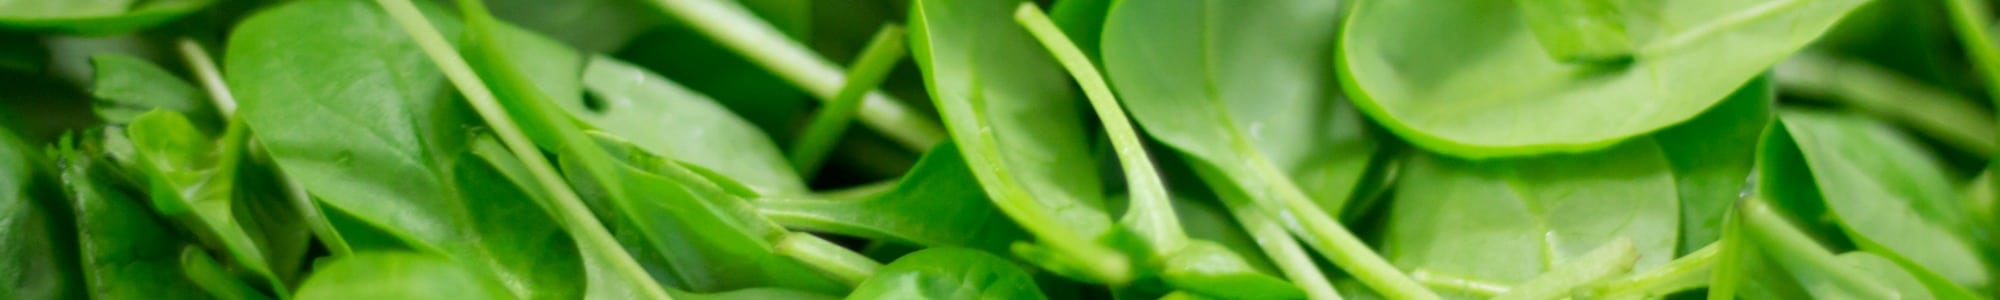 Spinach banner image